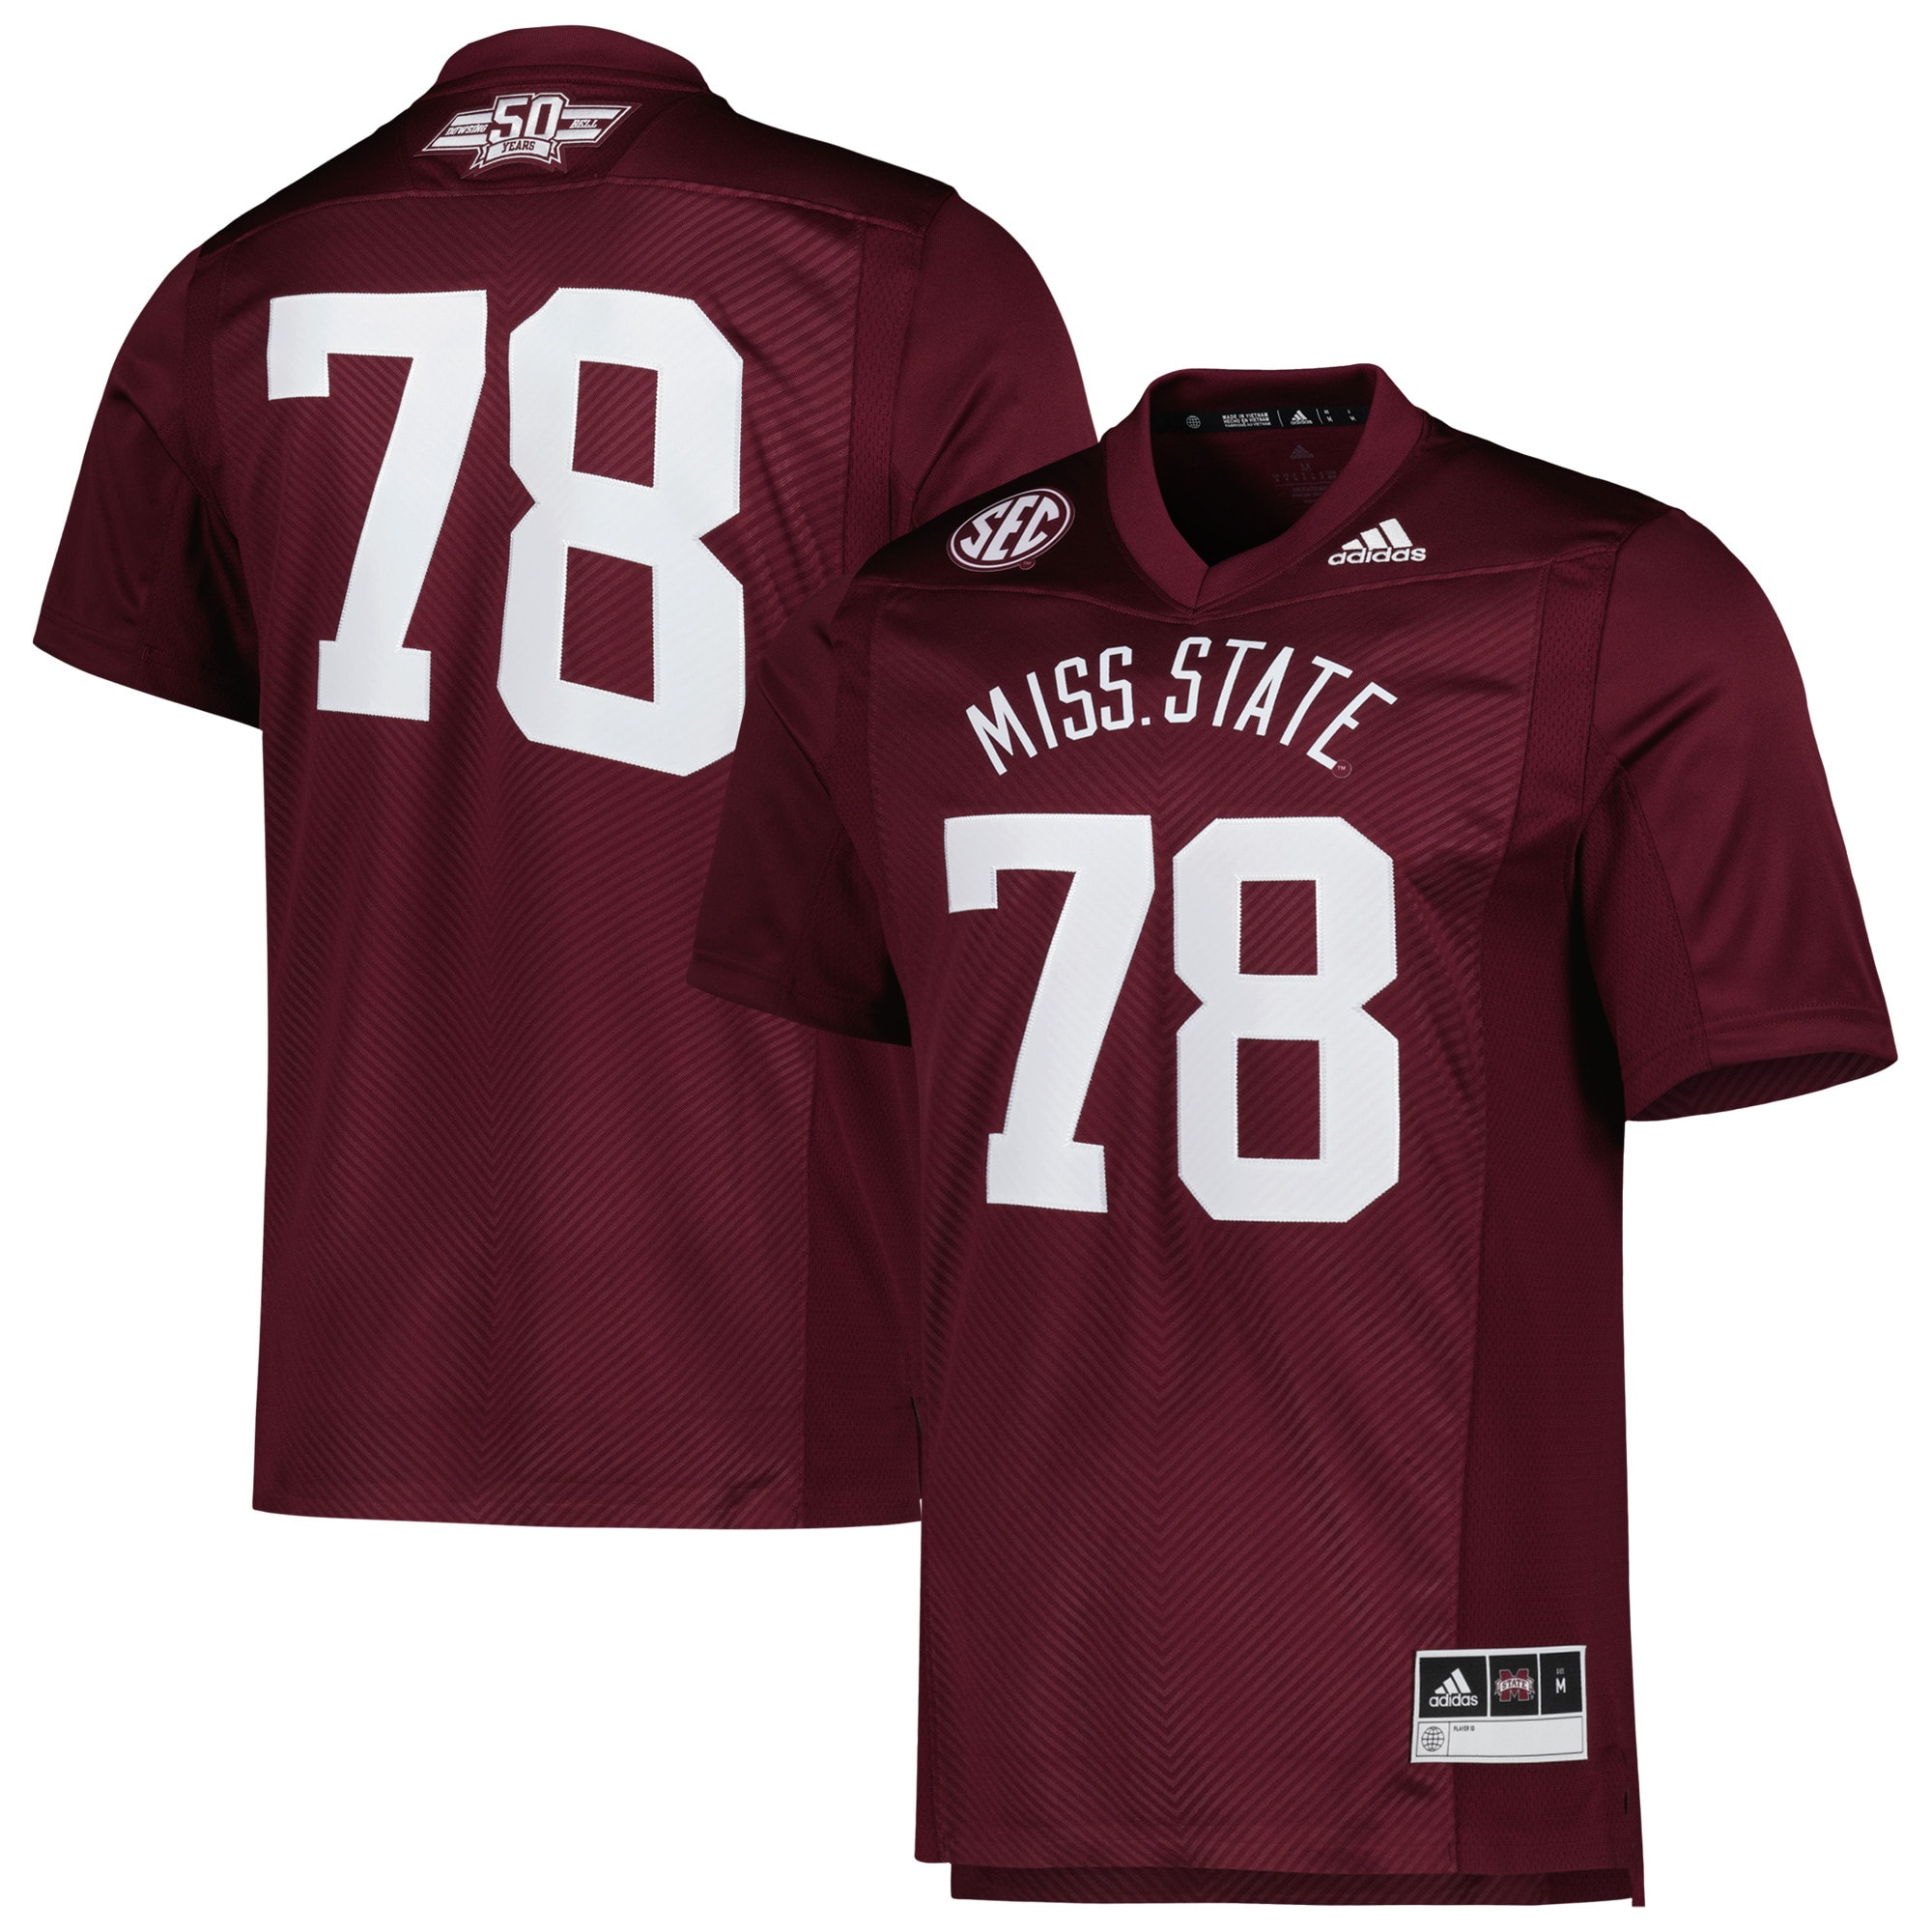 #78 Mississippi State Bulldogs   Dowsing X Bell 50 Years Premier Strategy Jersey - Maroon For Youth Women Men